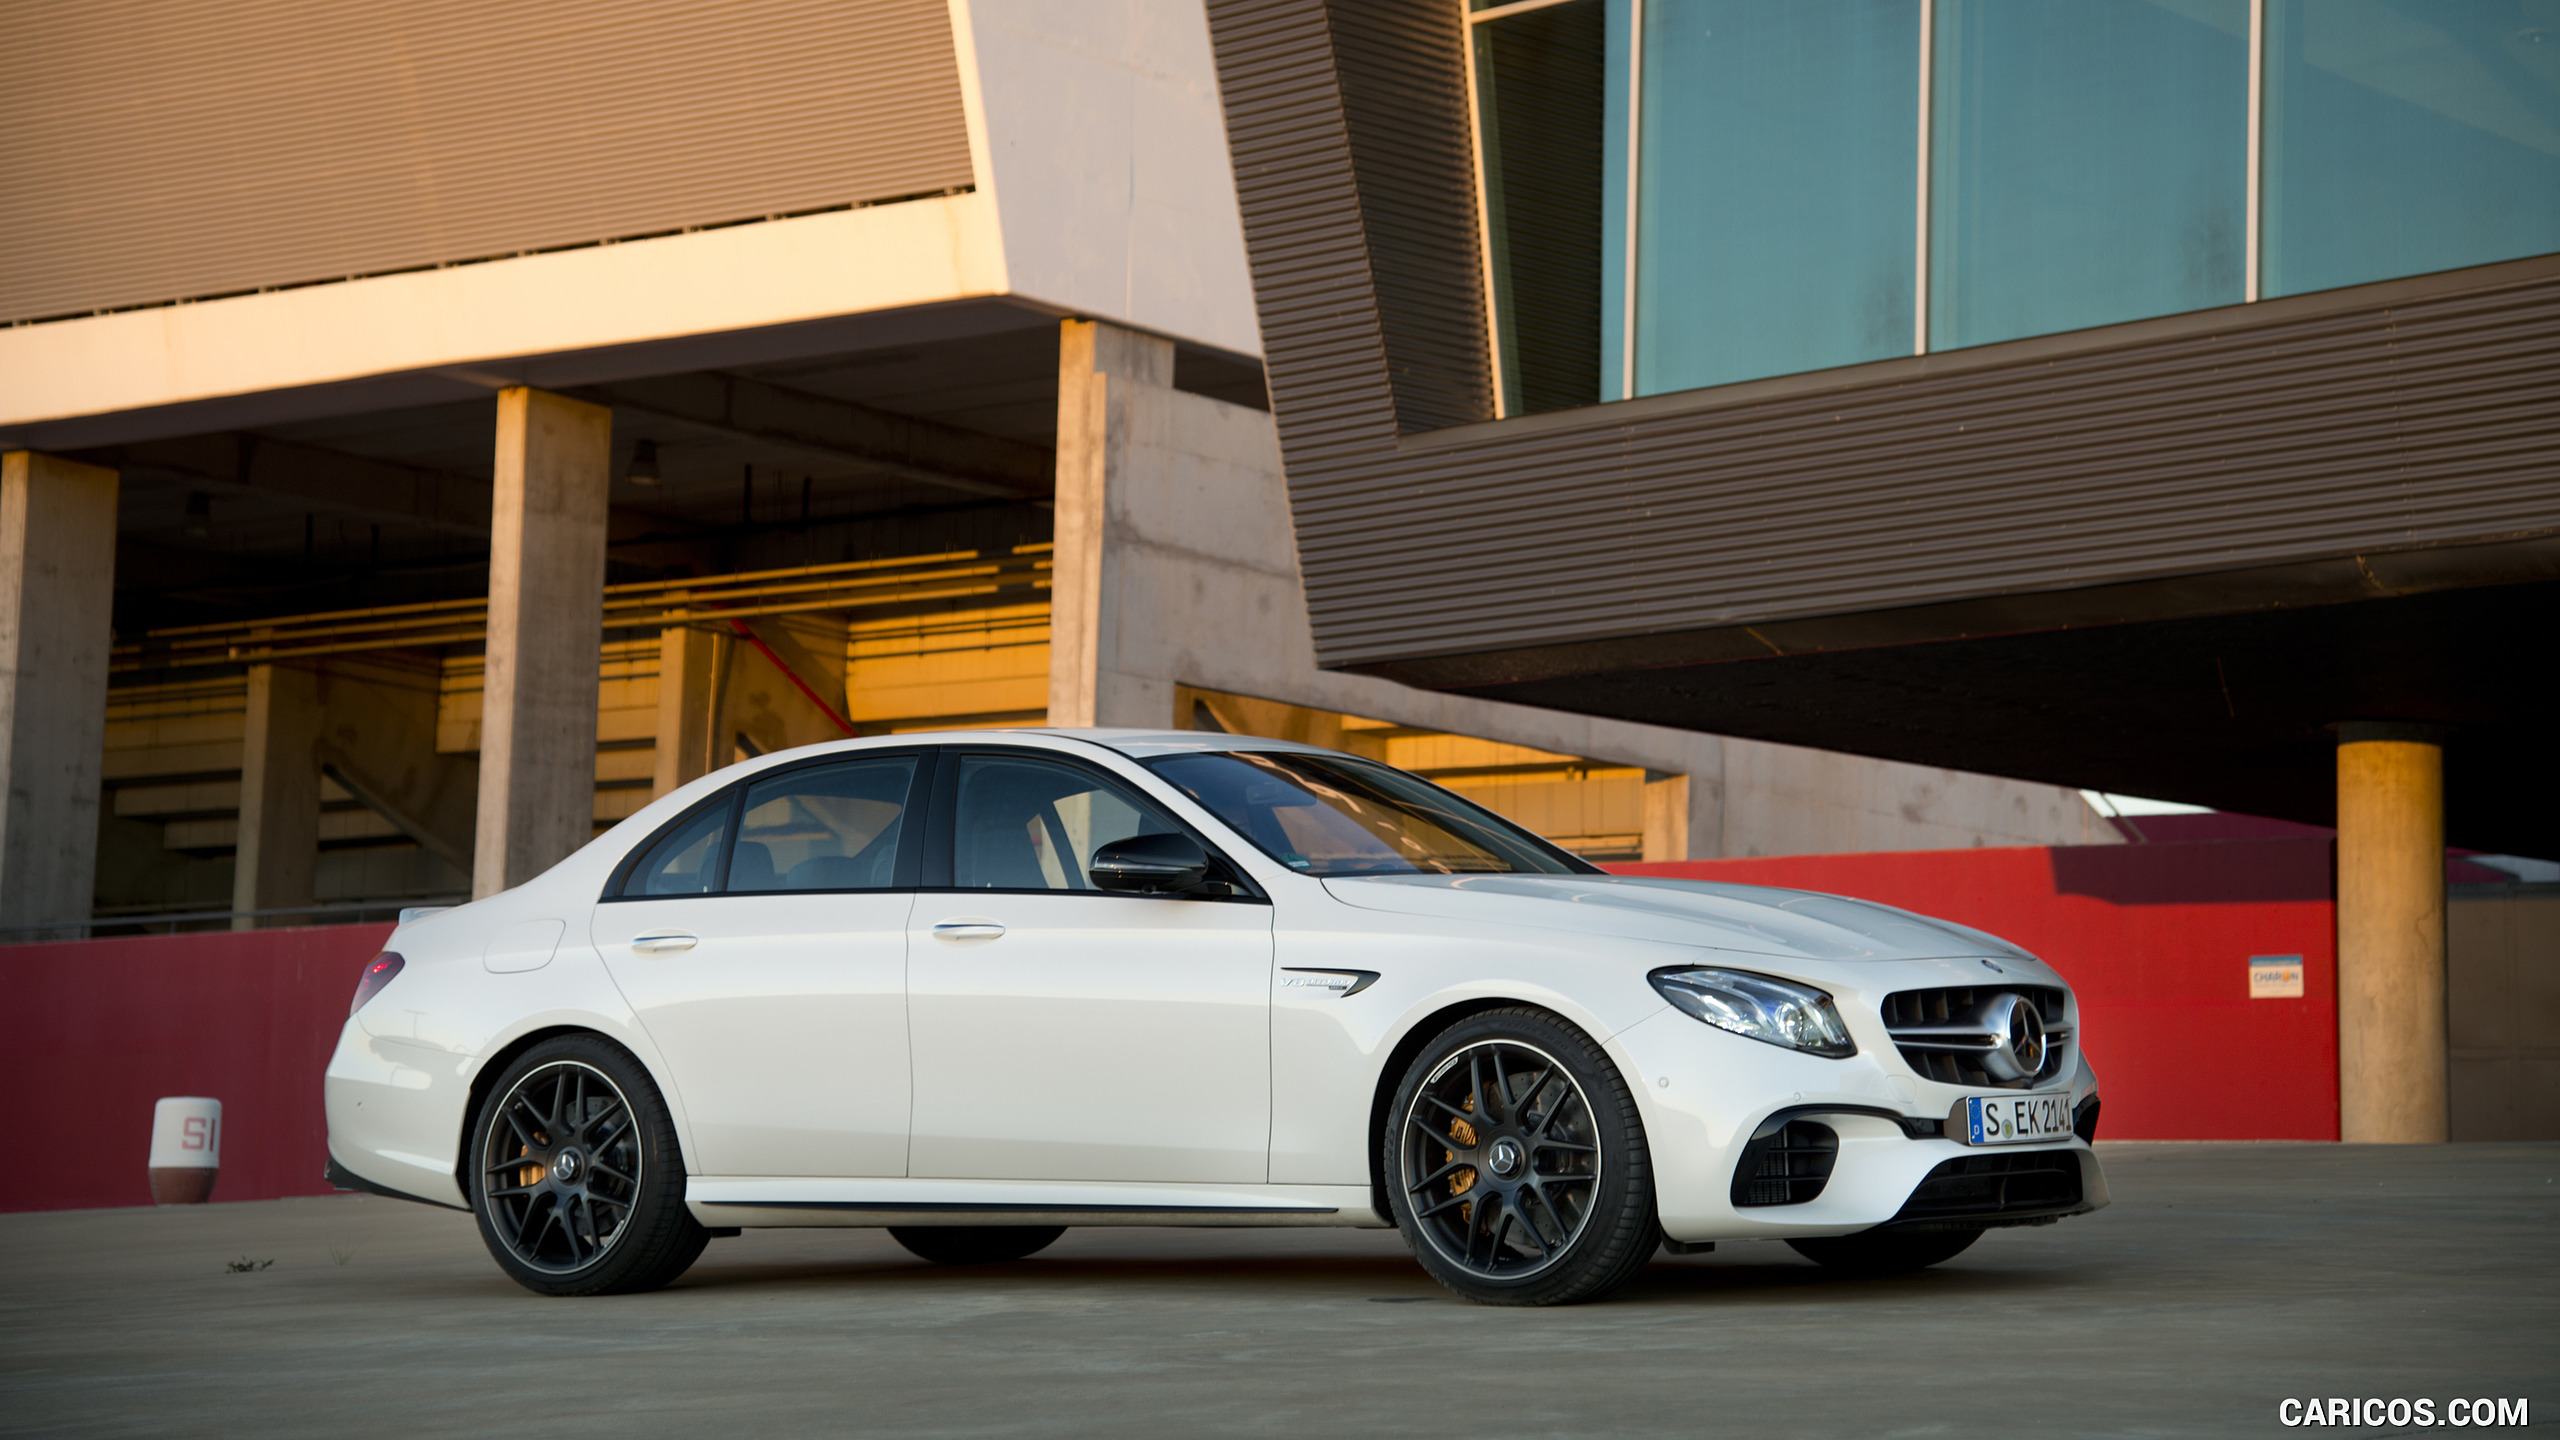 2018 Mercedes-AMG E63 S 4MATIC+ - Side, #79 of 323